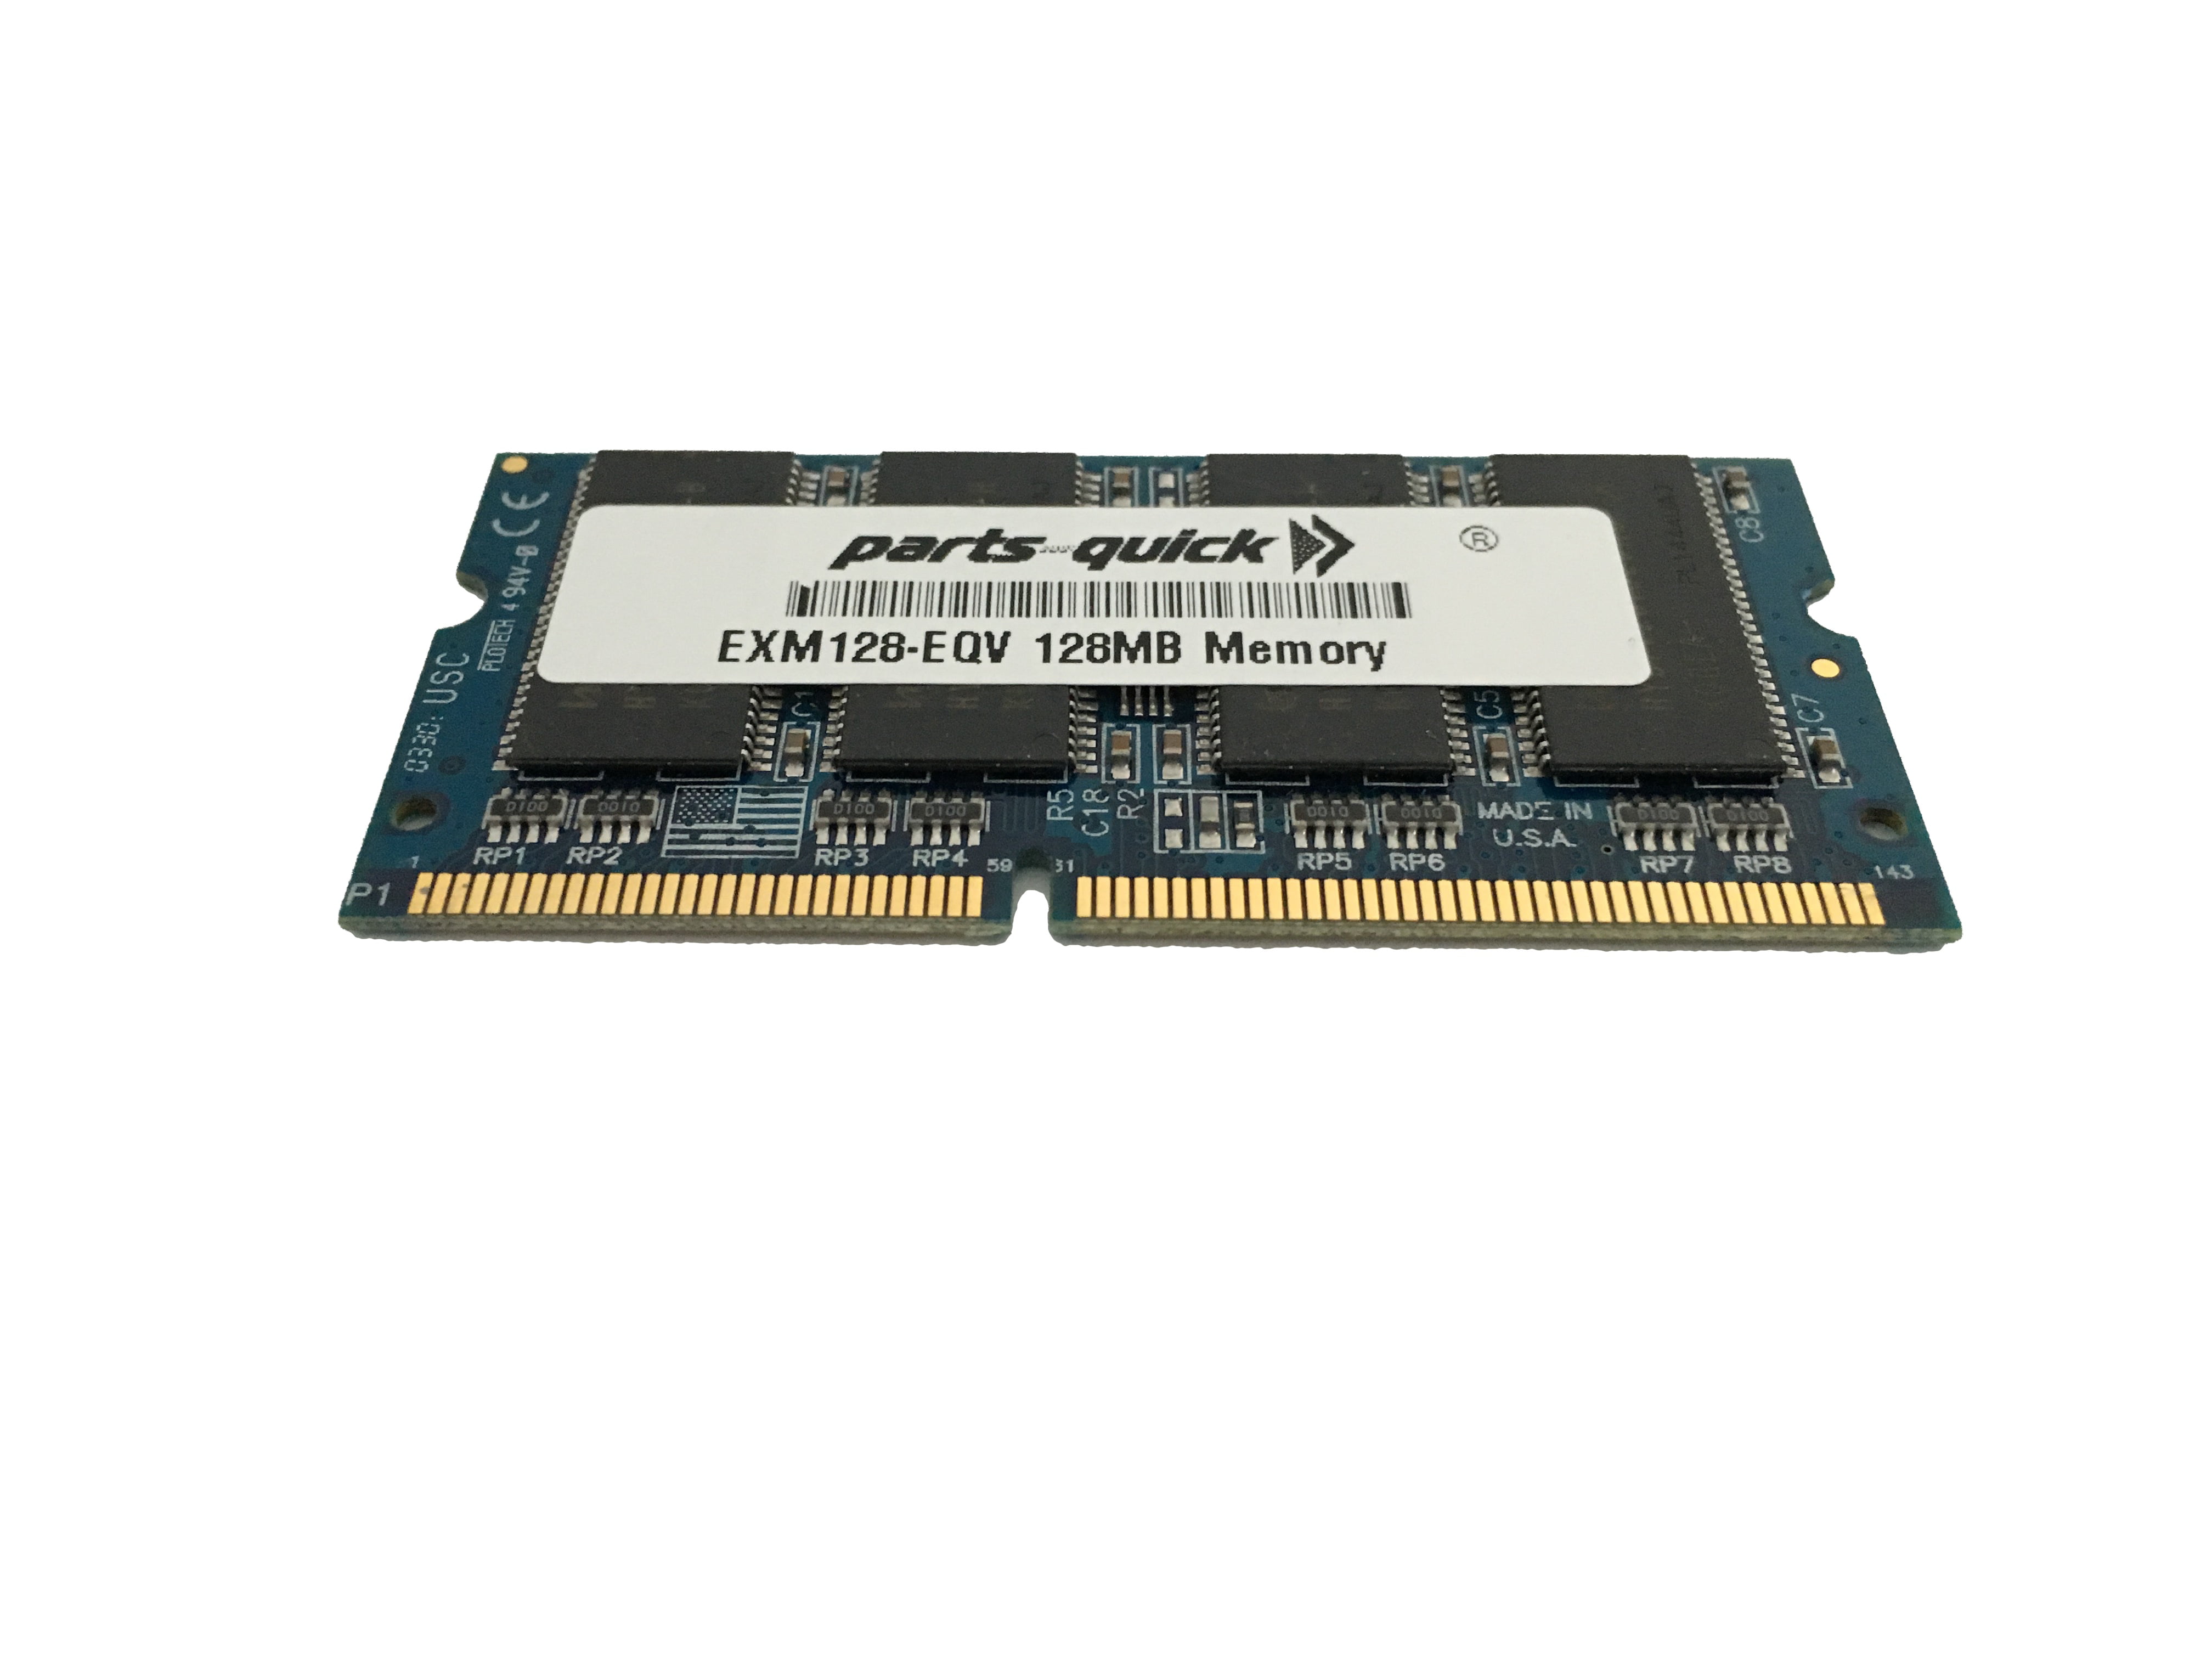 PARTS-QUICK BRAND 16GB Memory for ASUS ROG G20CB DDR4 2133MHz SODIMM RAM